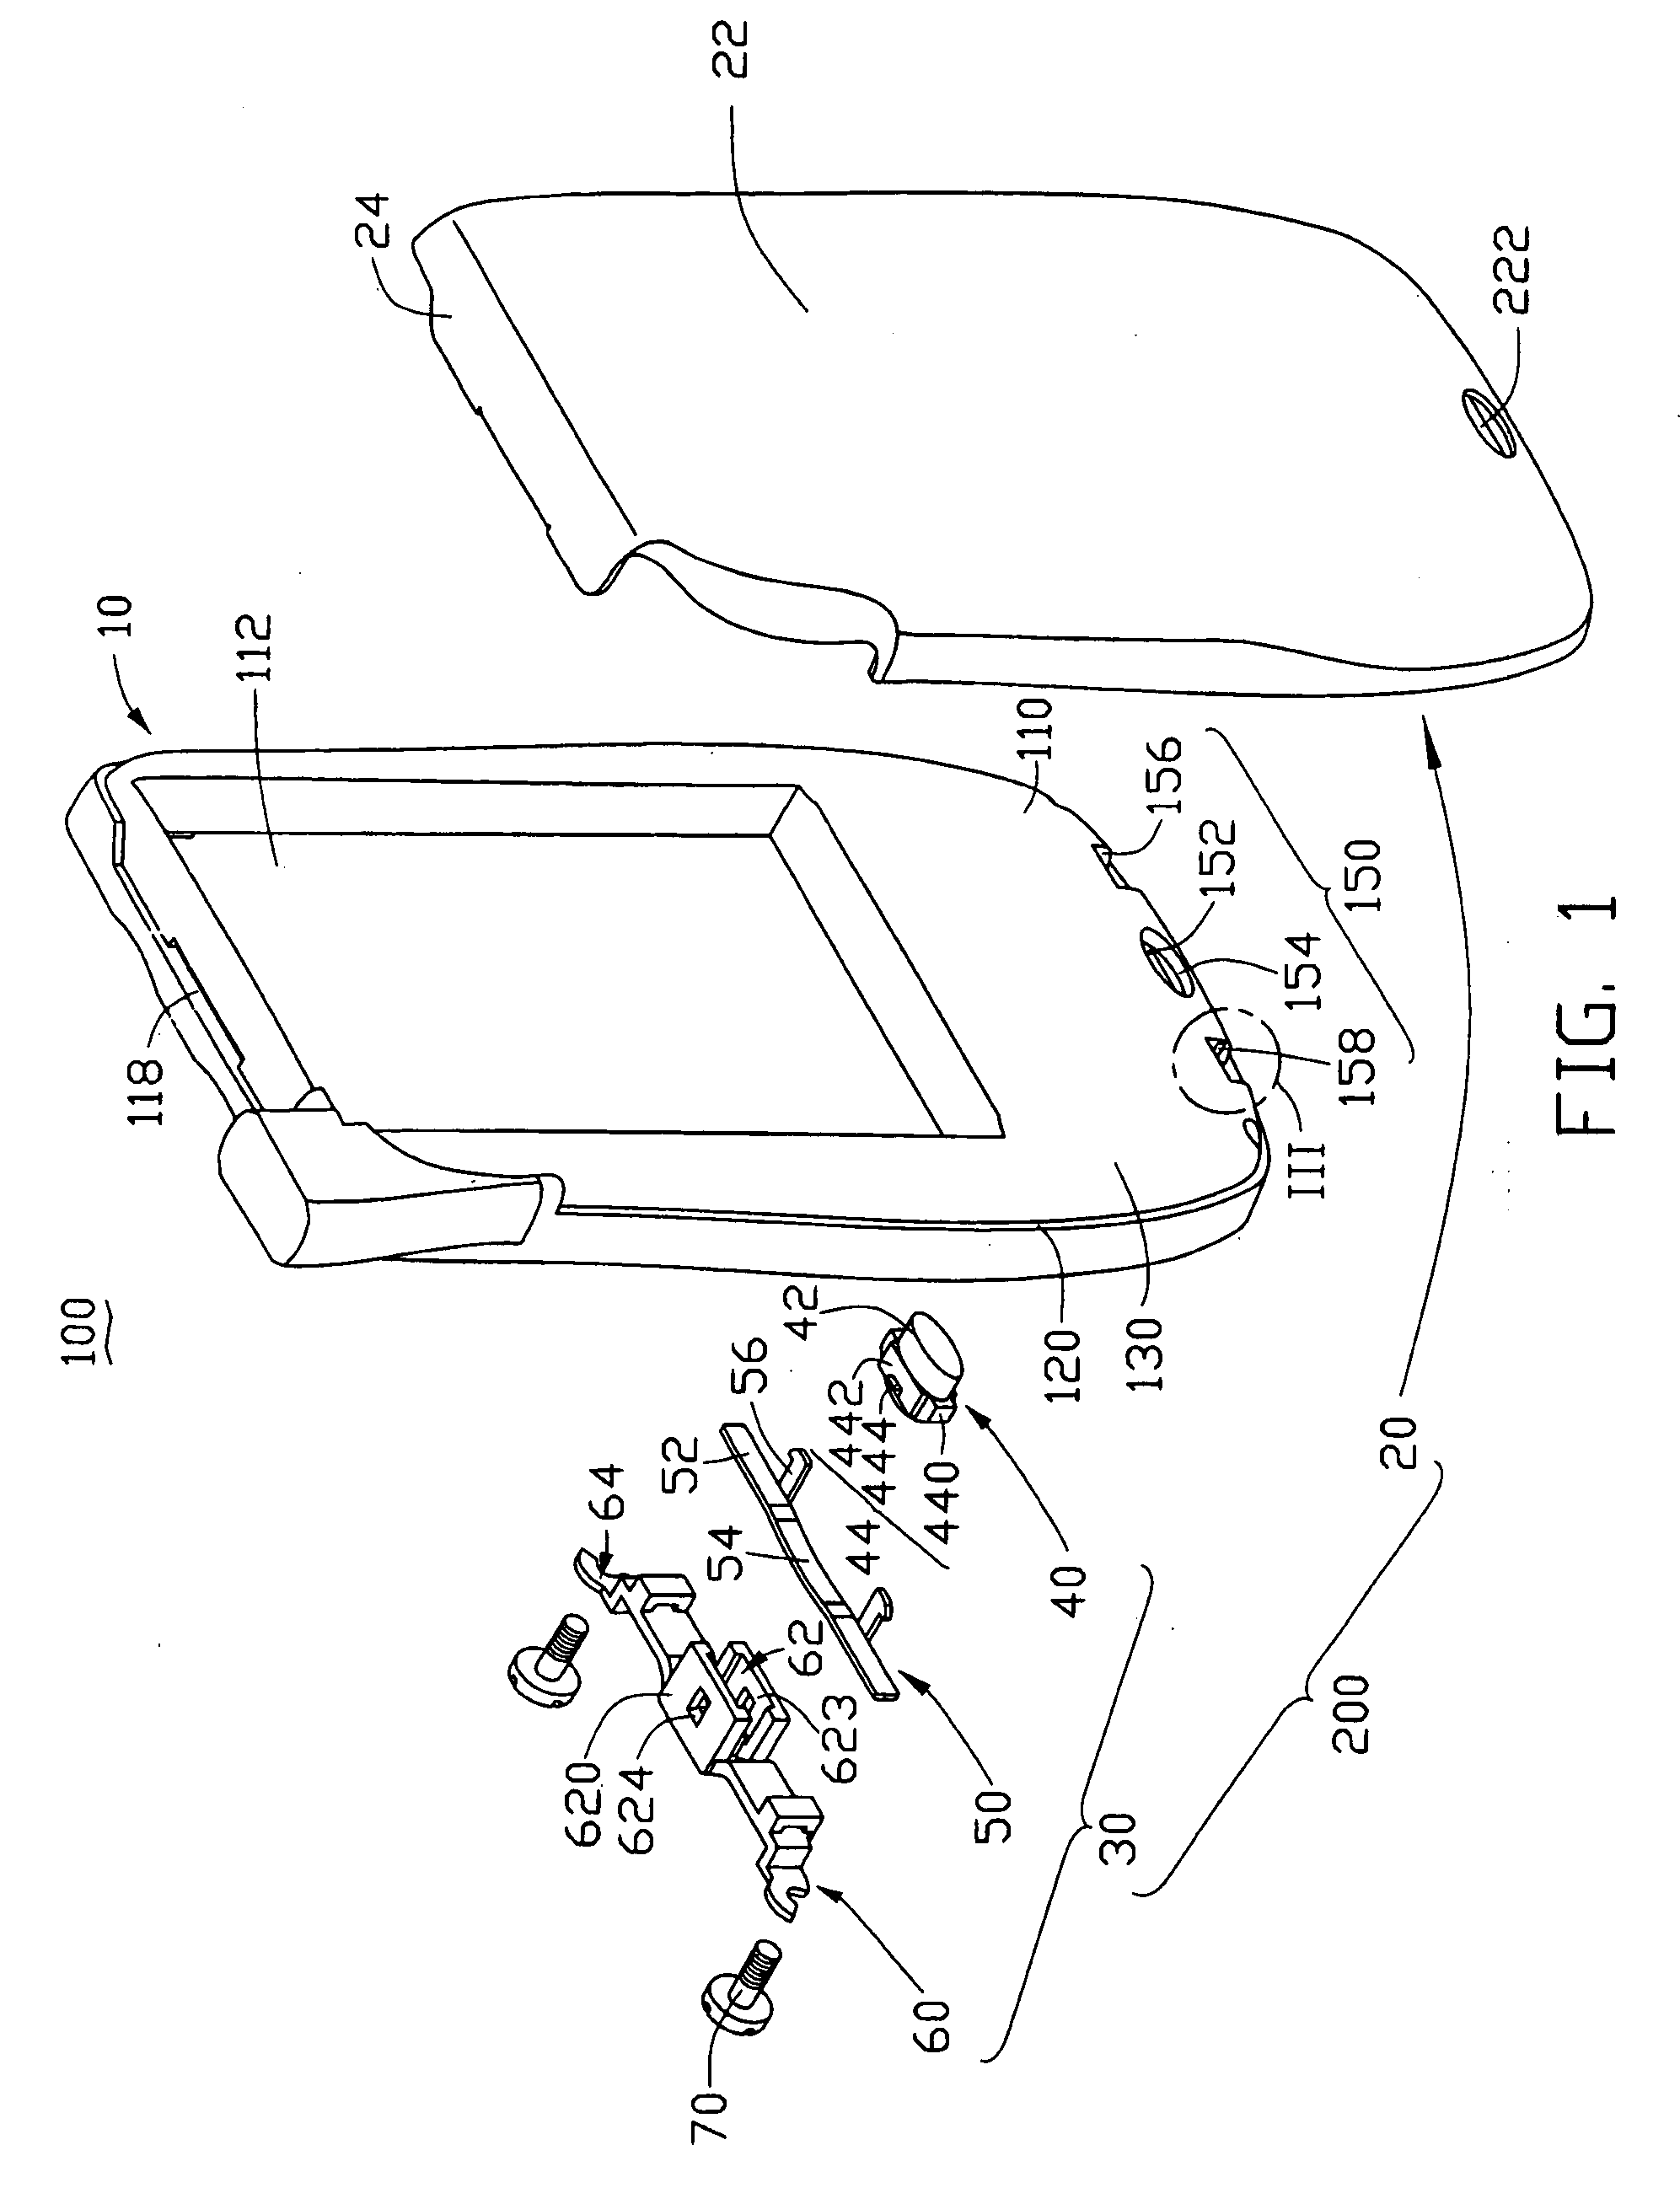 Battery cover assembly for portable electronic device